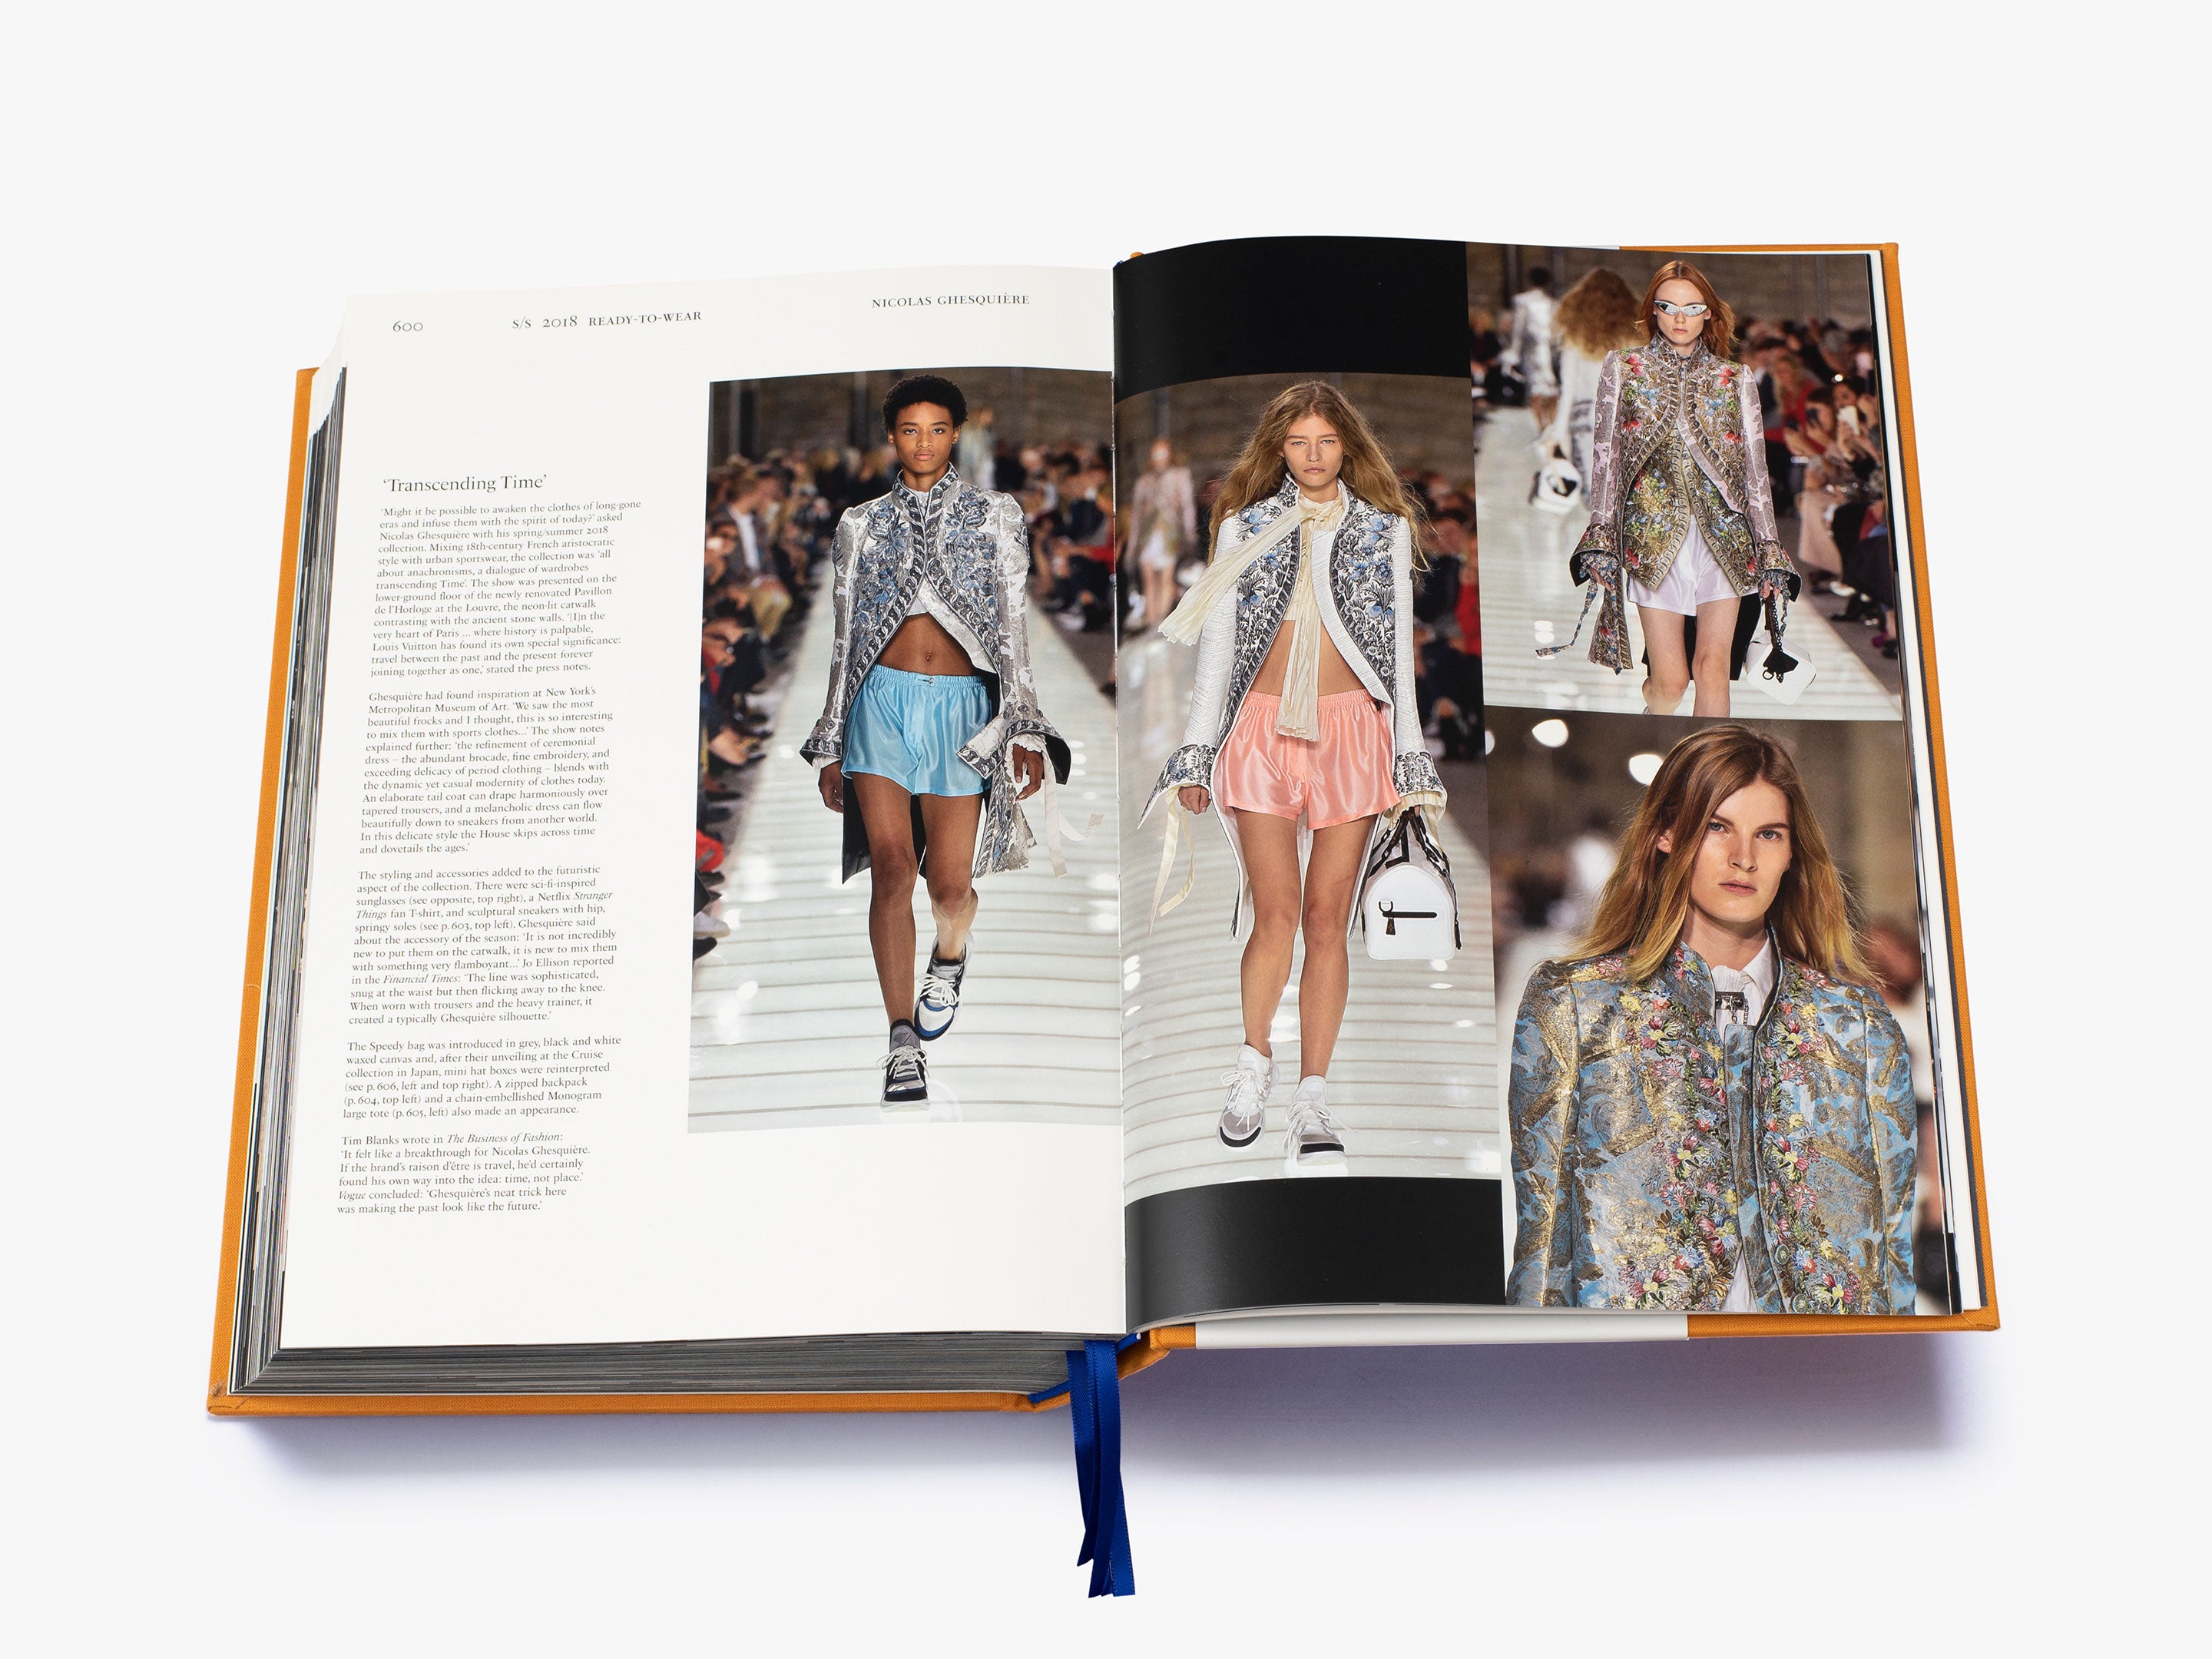 Louis Vuitton Catwalk: The Complete Collections – Silverbirch